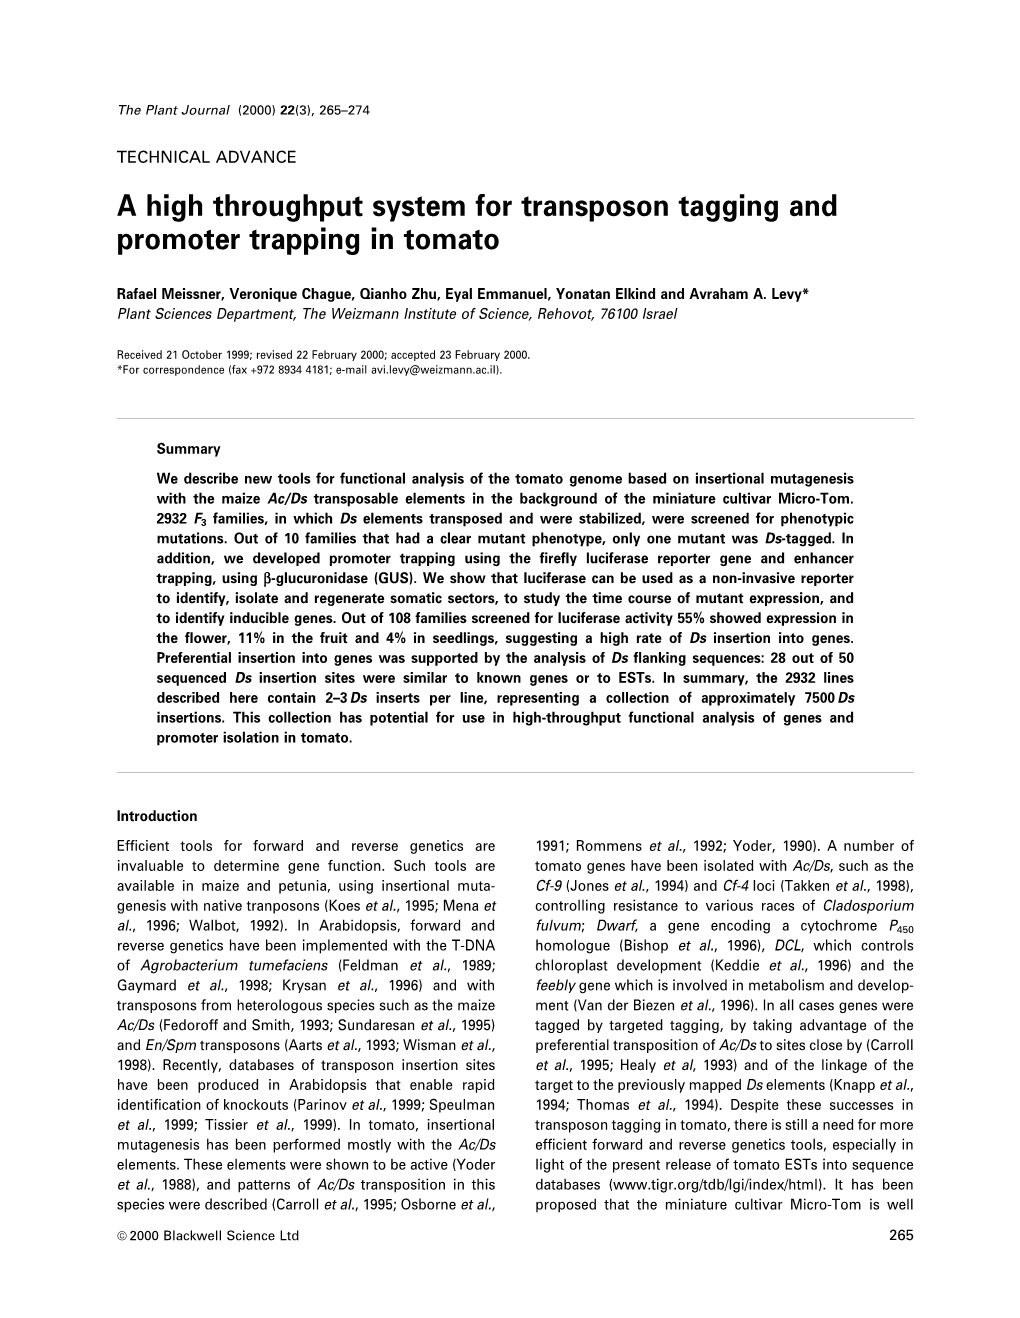 A High Throughput System for Transposon Tagging and Promoter Trapping in Tomato